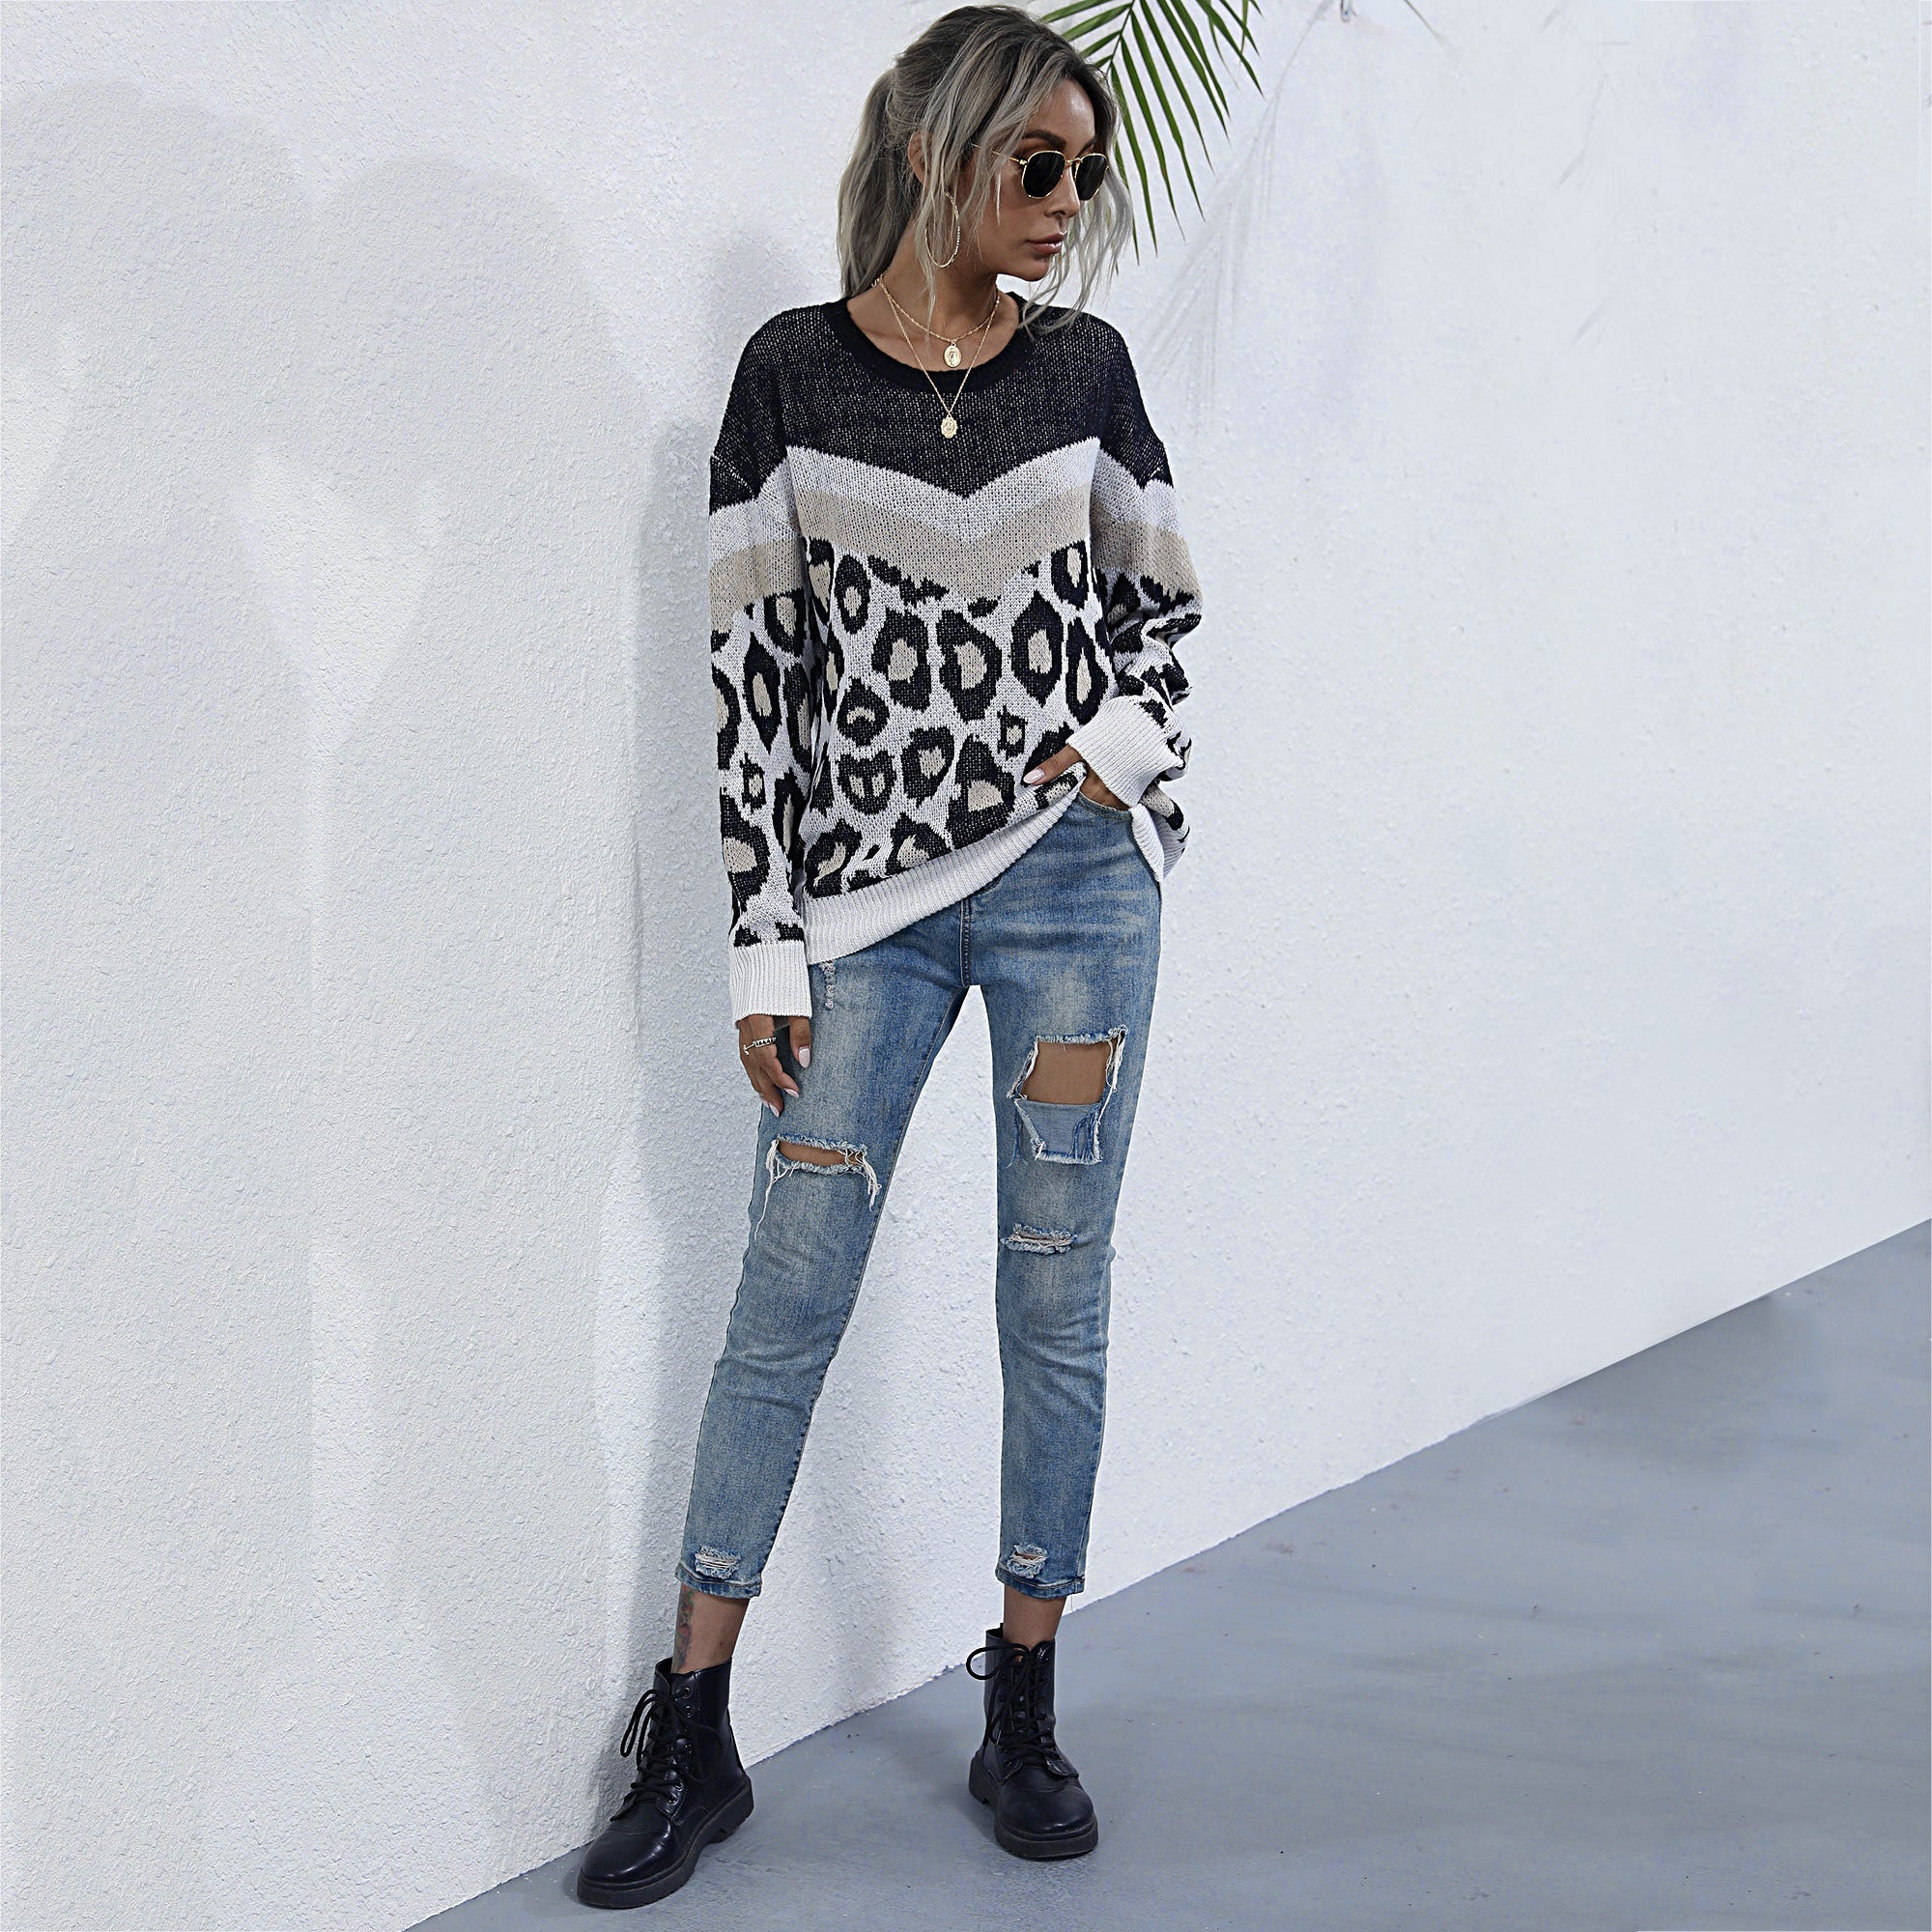 Leopard Printed Long Sleeve Loose Sweater Women O-neck Mid-length Knitted Pullover Sai Feel